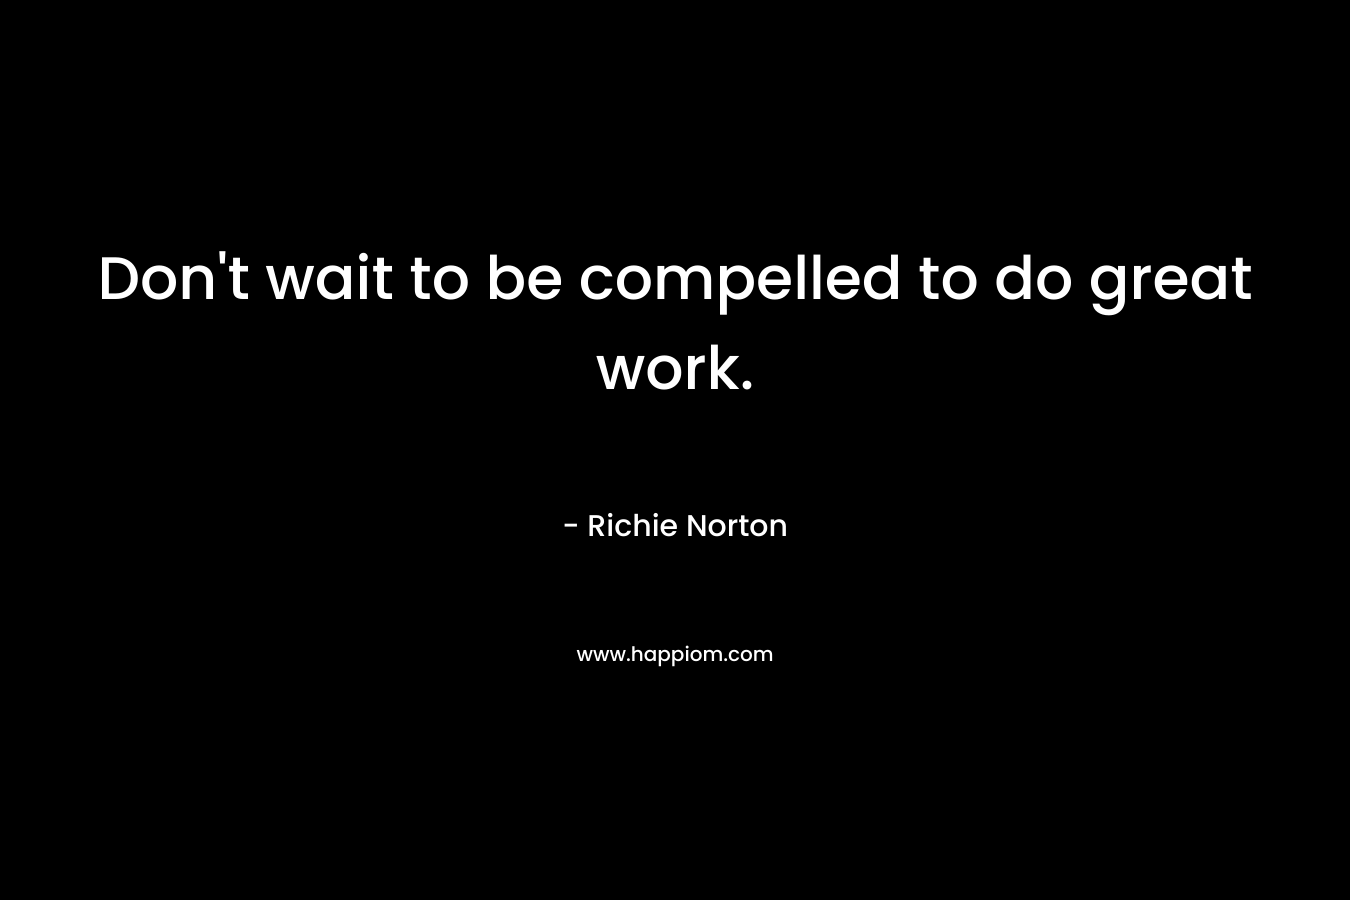 Don’t wait to be compelled to do great work. – Richie Norton